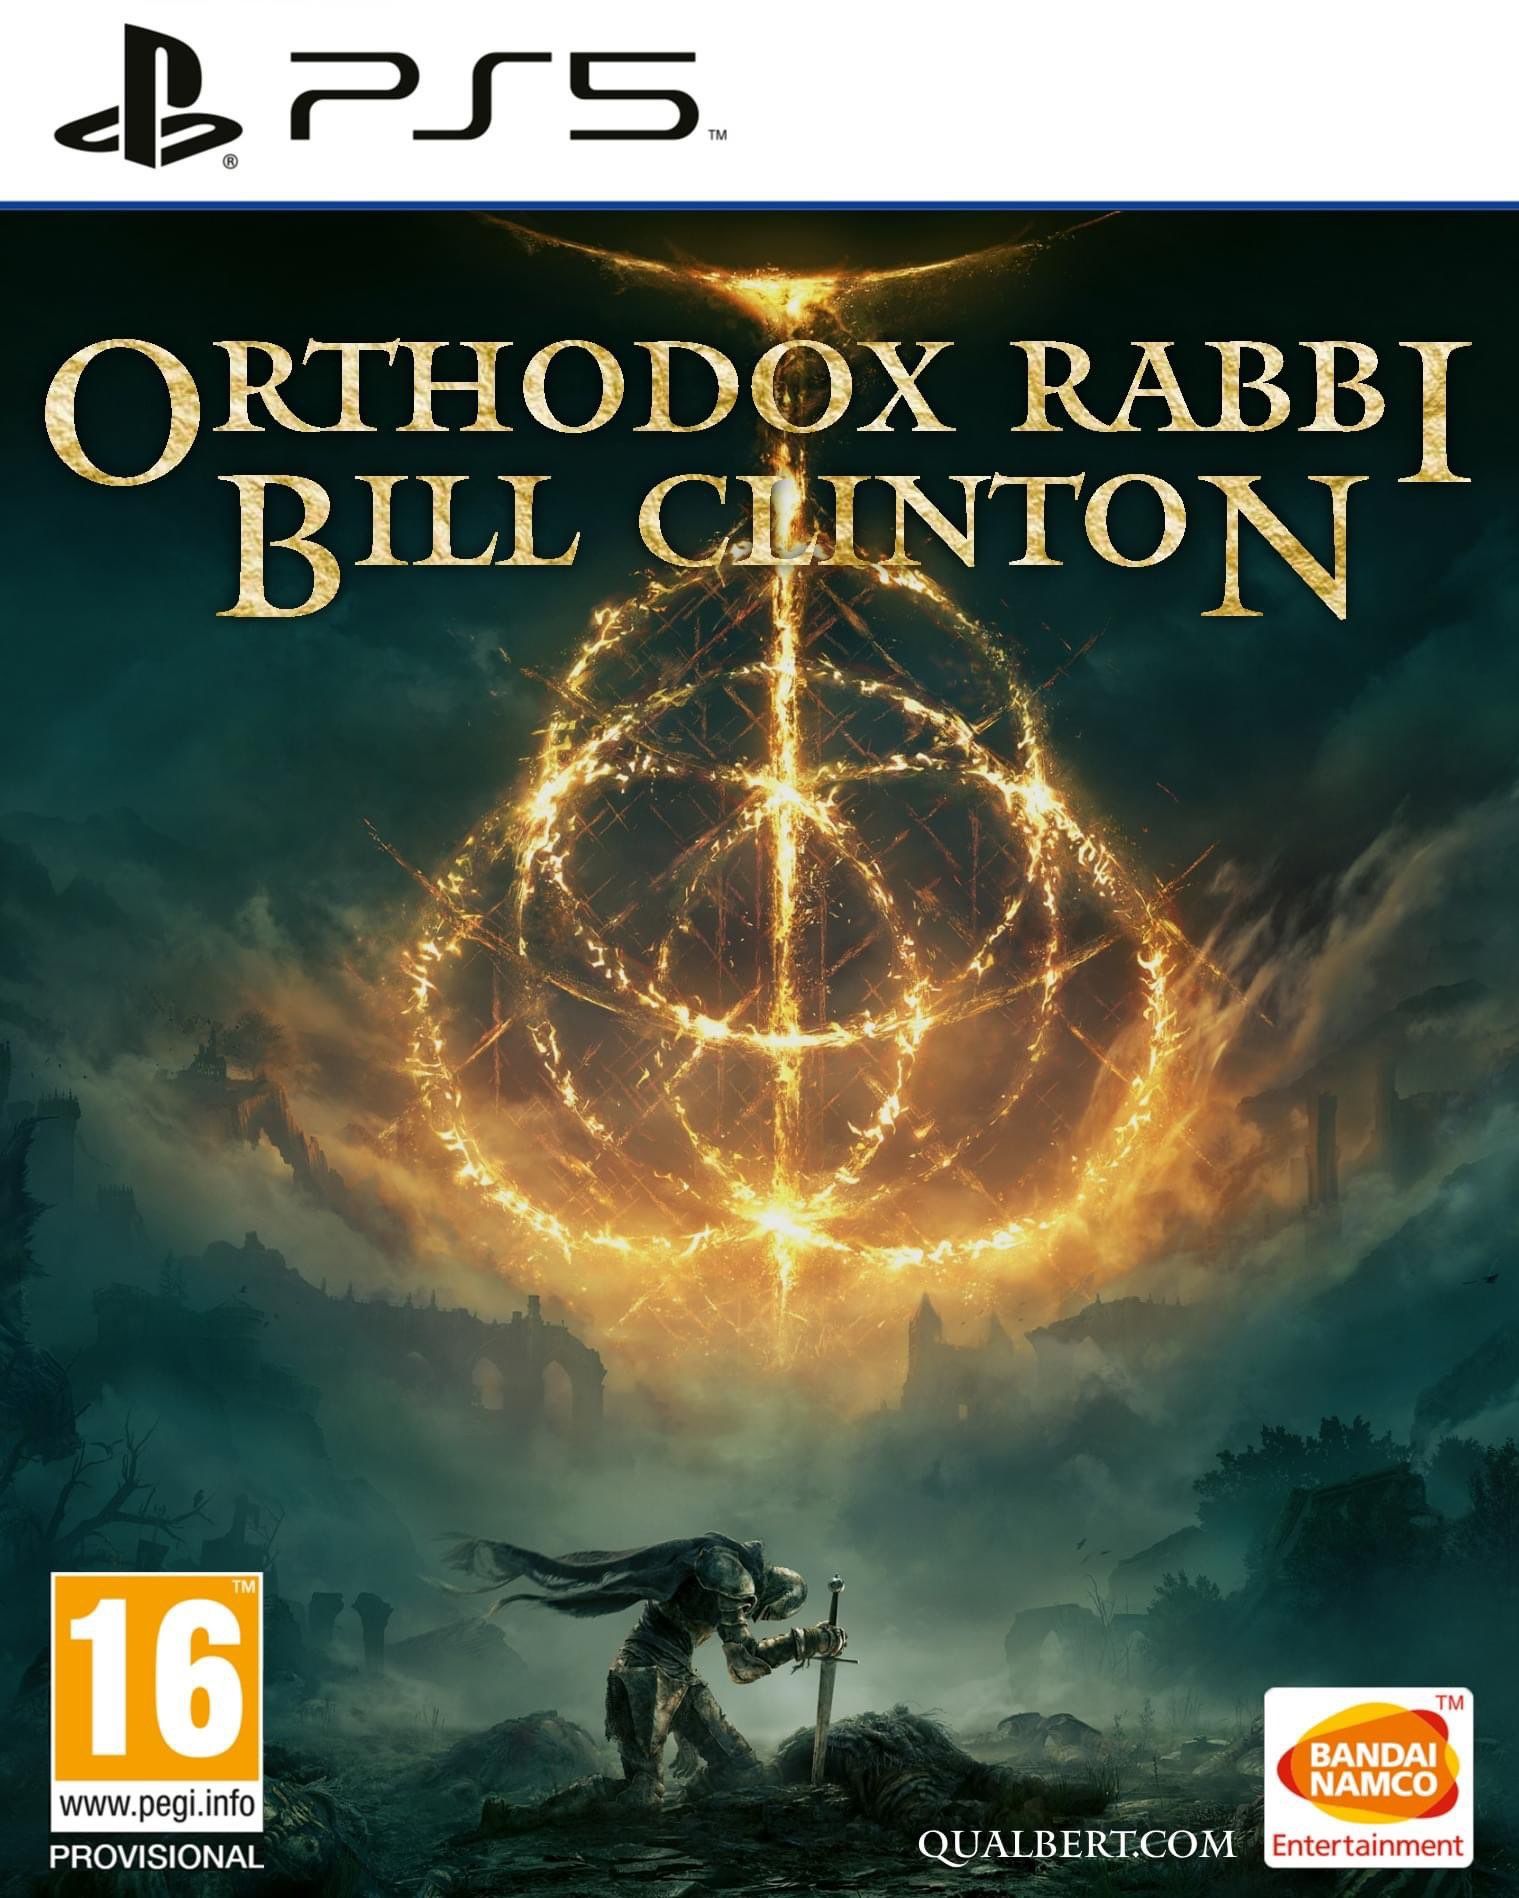 Game of the year edition